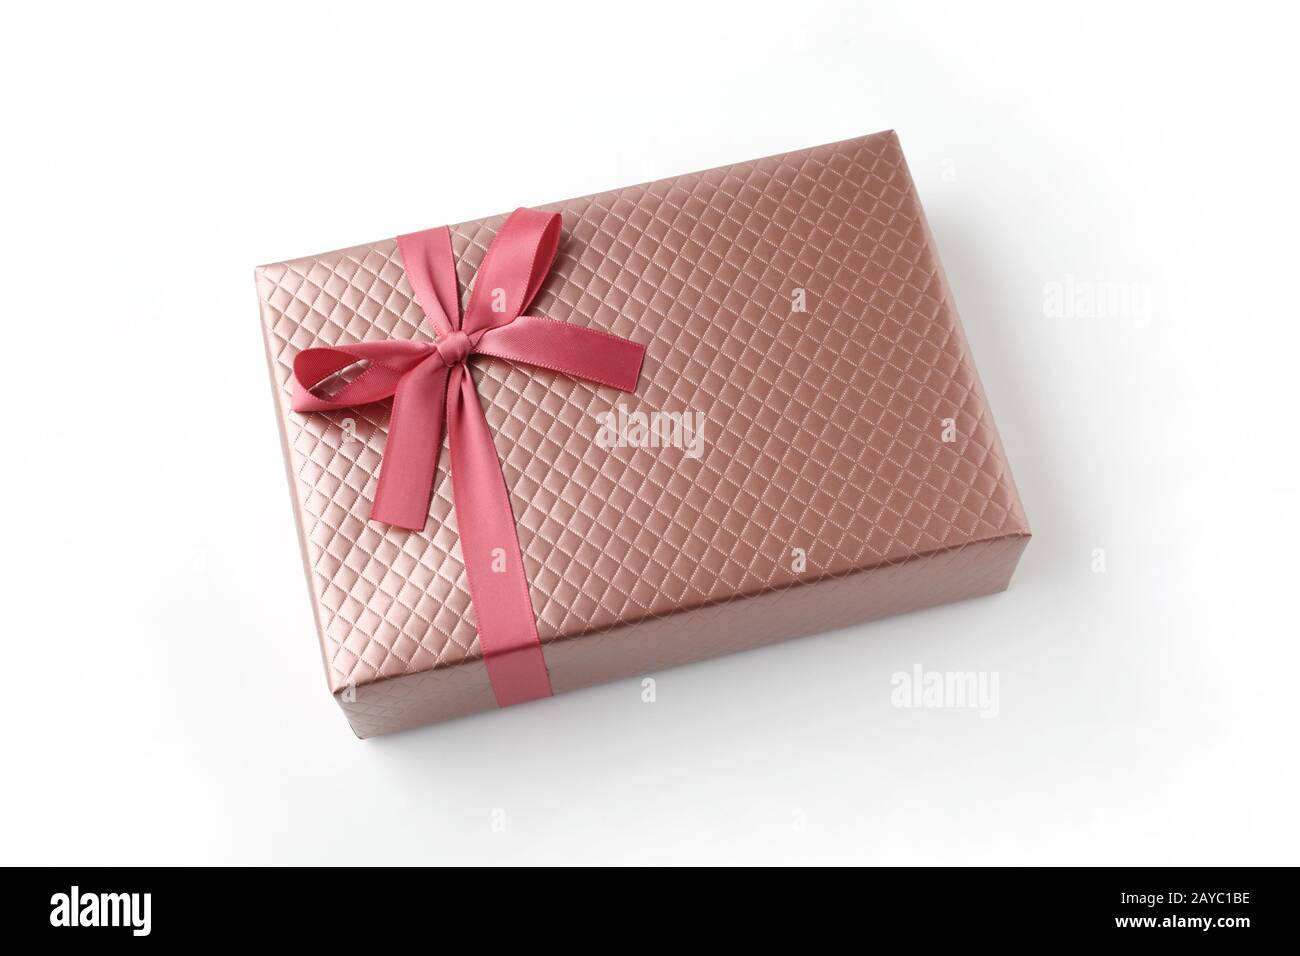 gift present box with ribbon isolated on white background Stock Photo